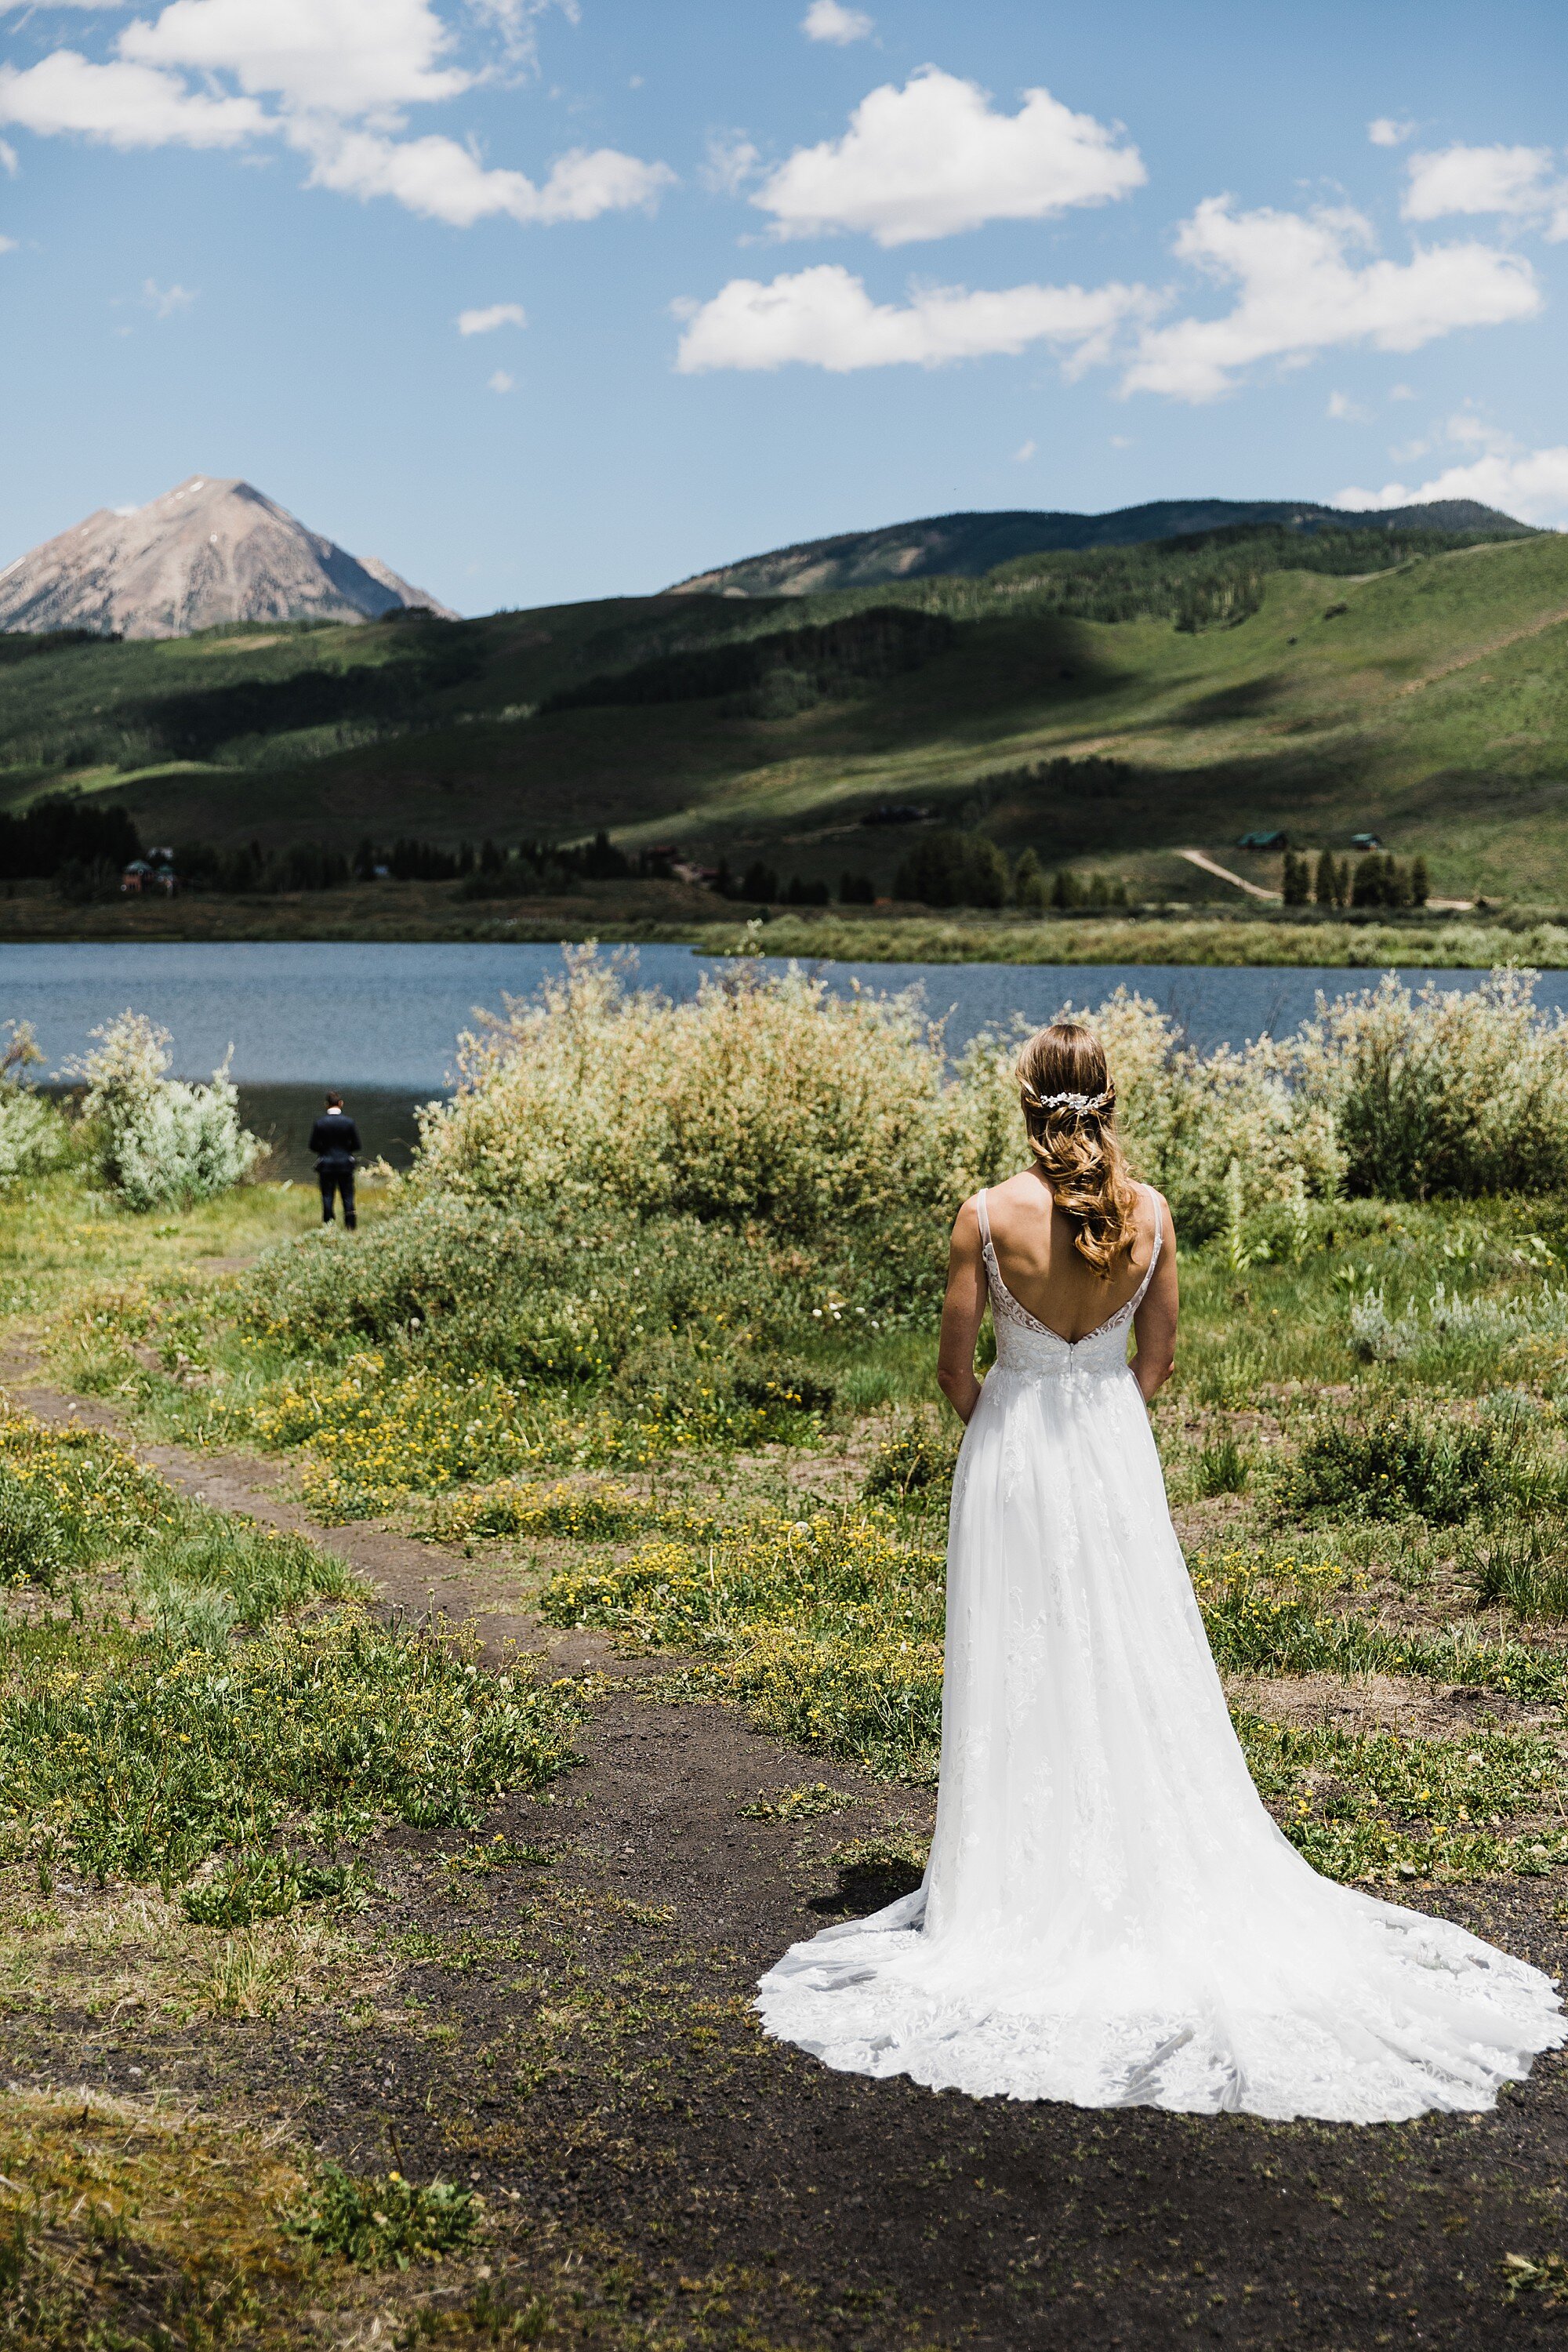 Mountaintop Elopement in Colorado with Wildflowers | Crested Butte Elopement | Vow of the Wild